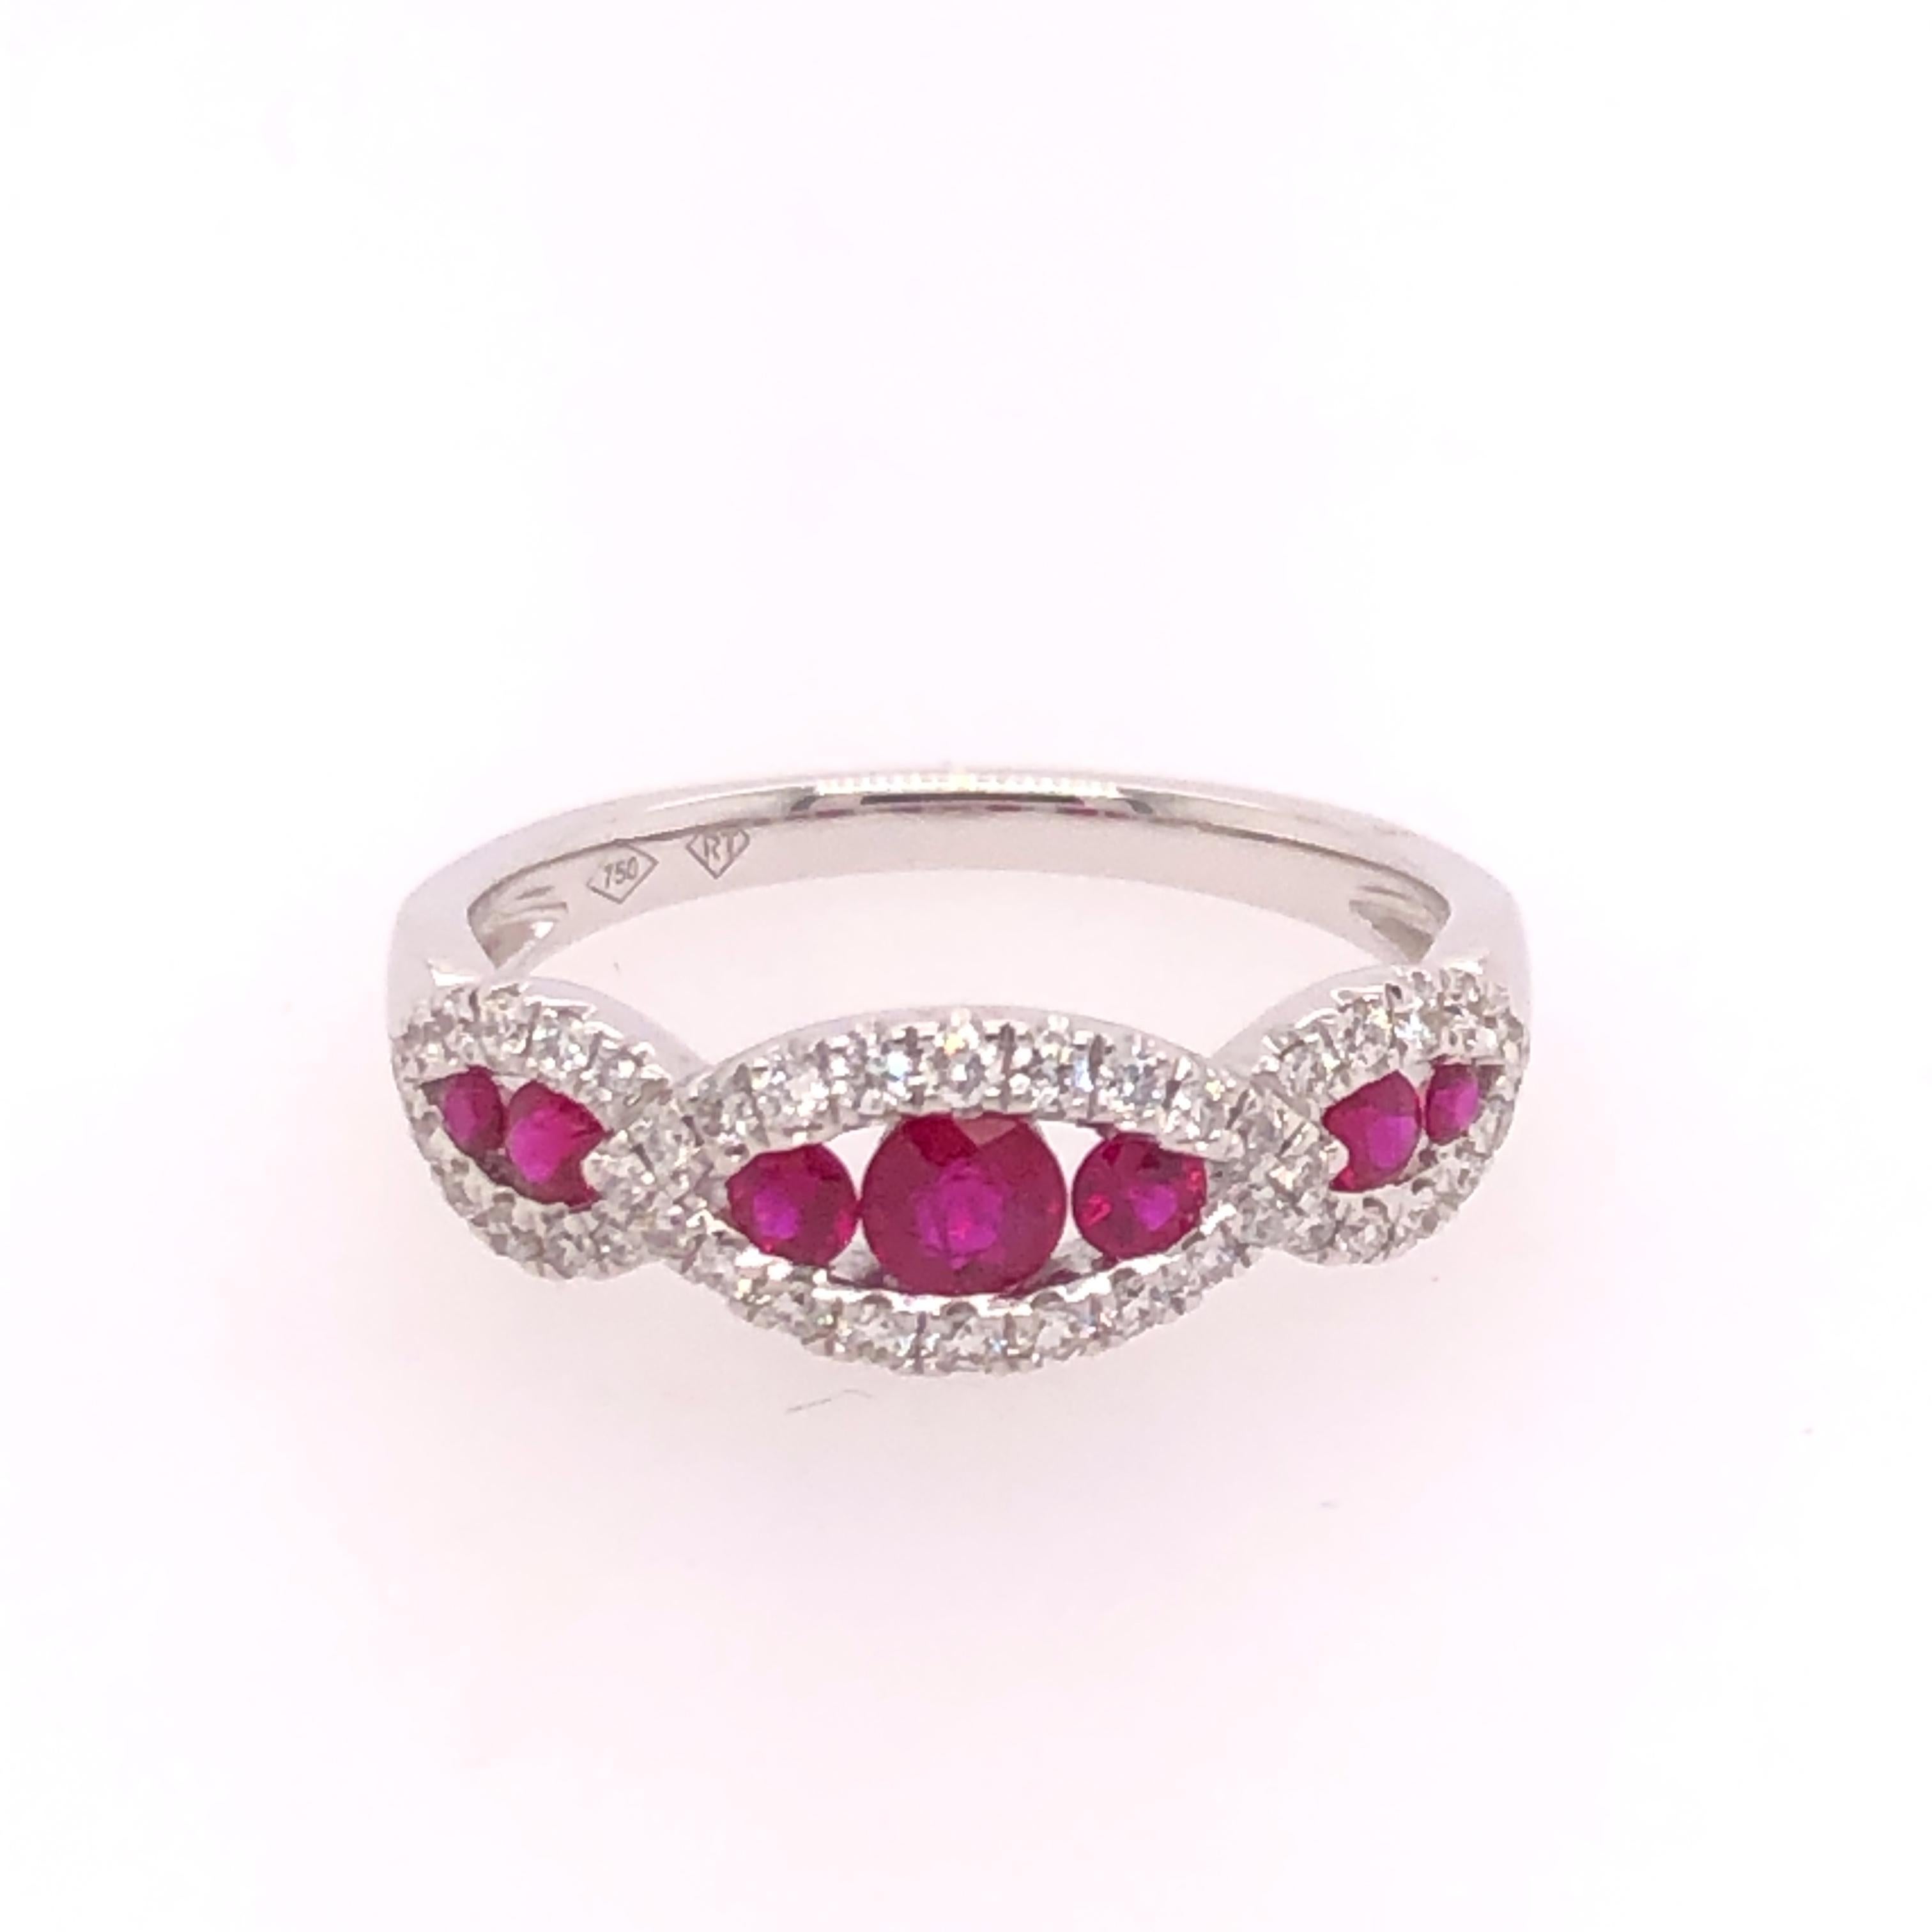 An elegant and fashionable marquise-like design allows this ruby and diamond ring to be an everyday ring. The 18K white gold mounting is set with 7 rubies of varying sizes (total carat weight of 0.46 CT) and 42 accent diamonds (total carat weight of